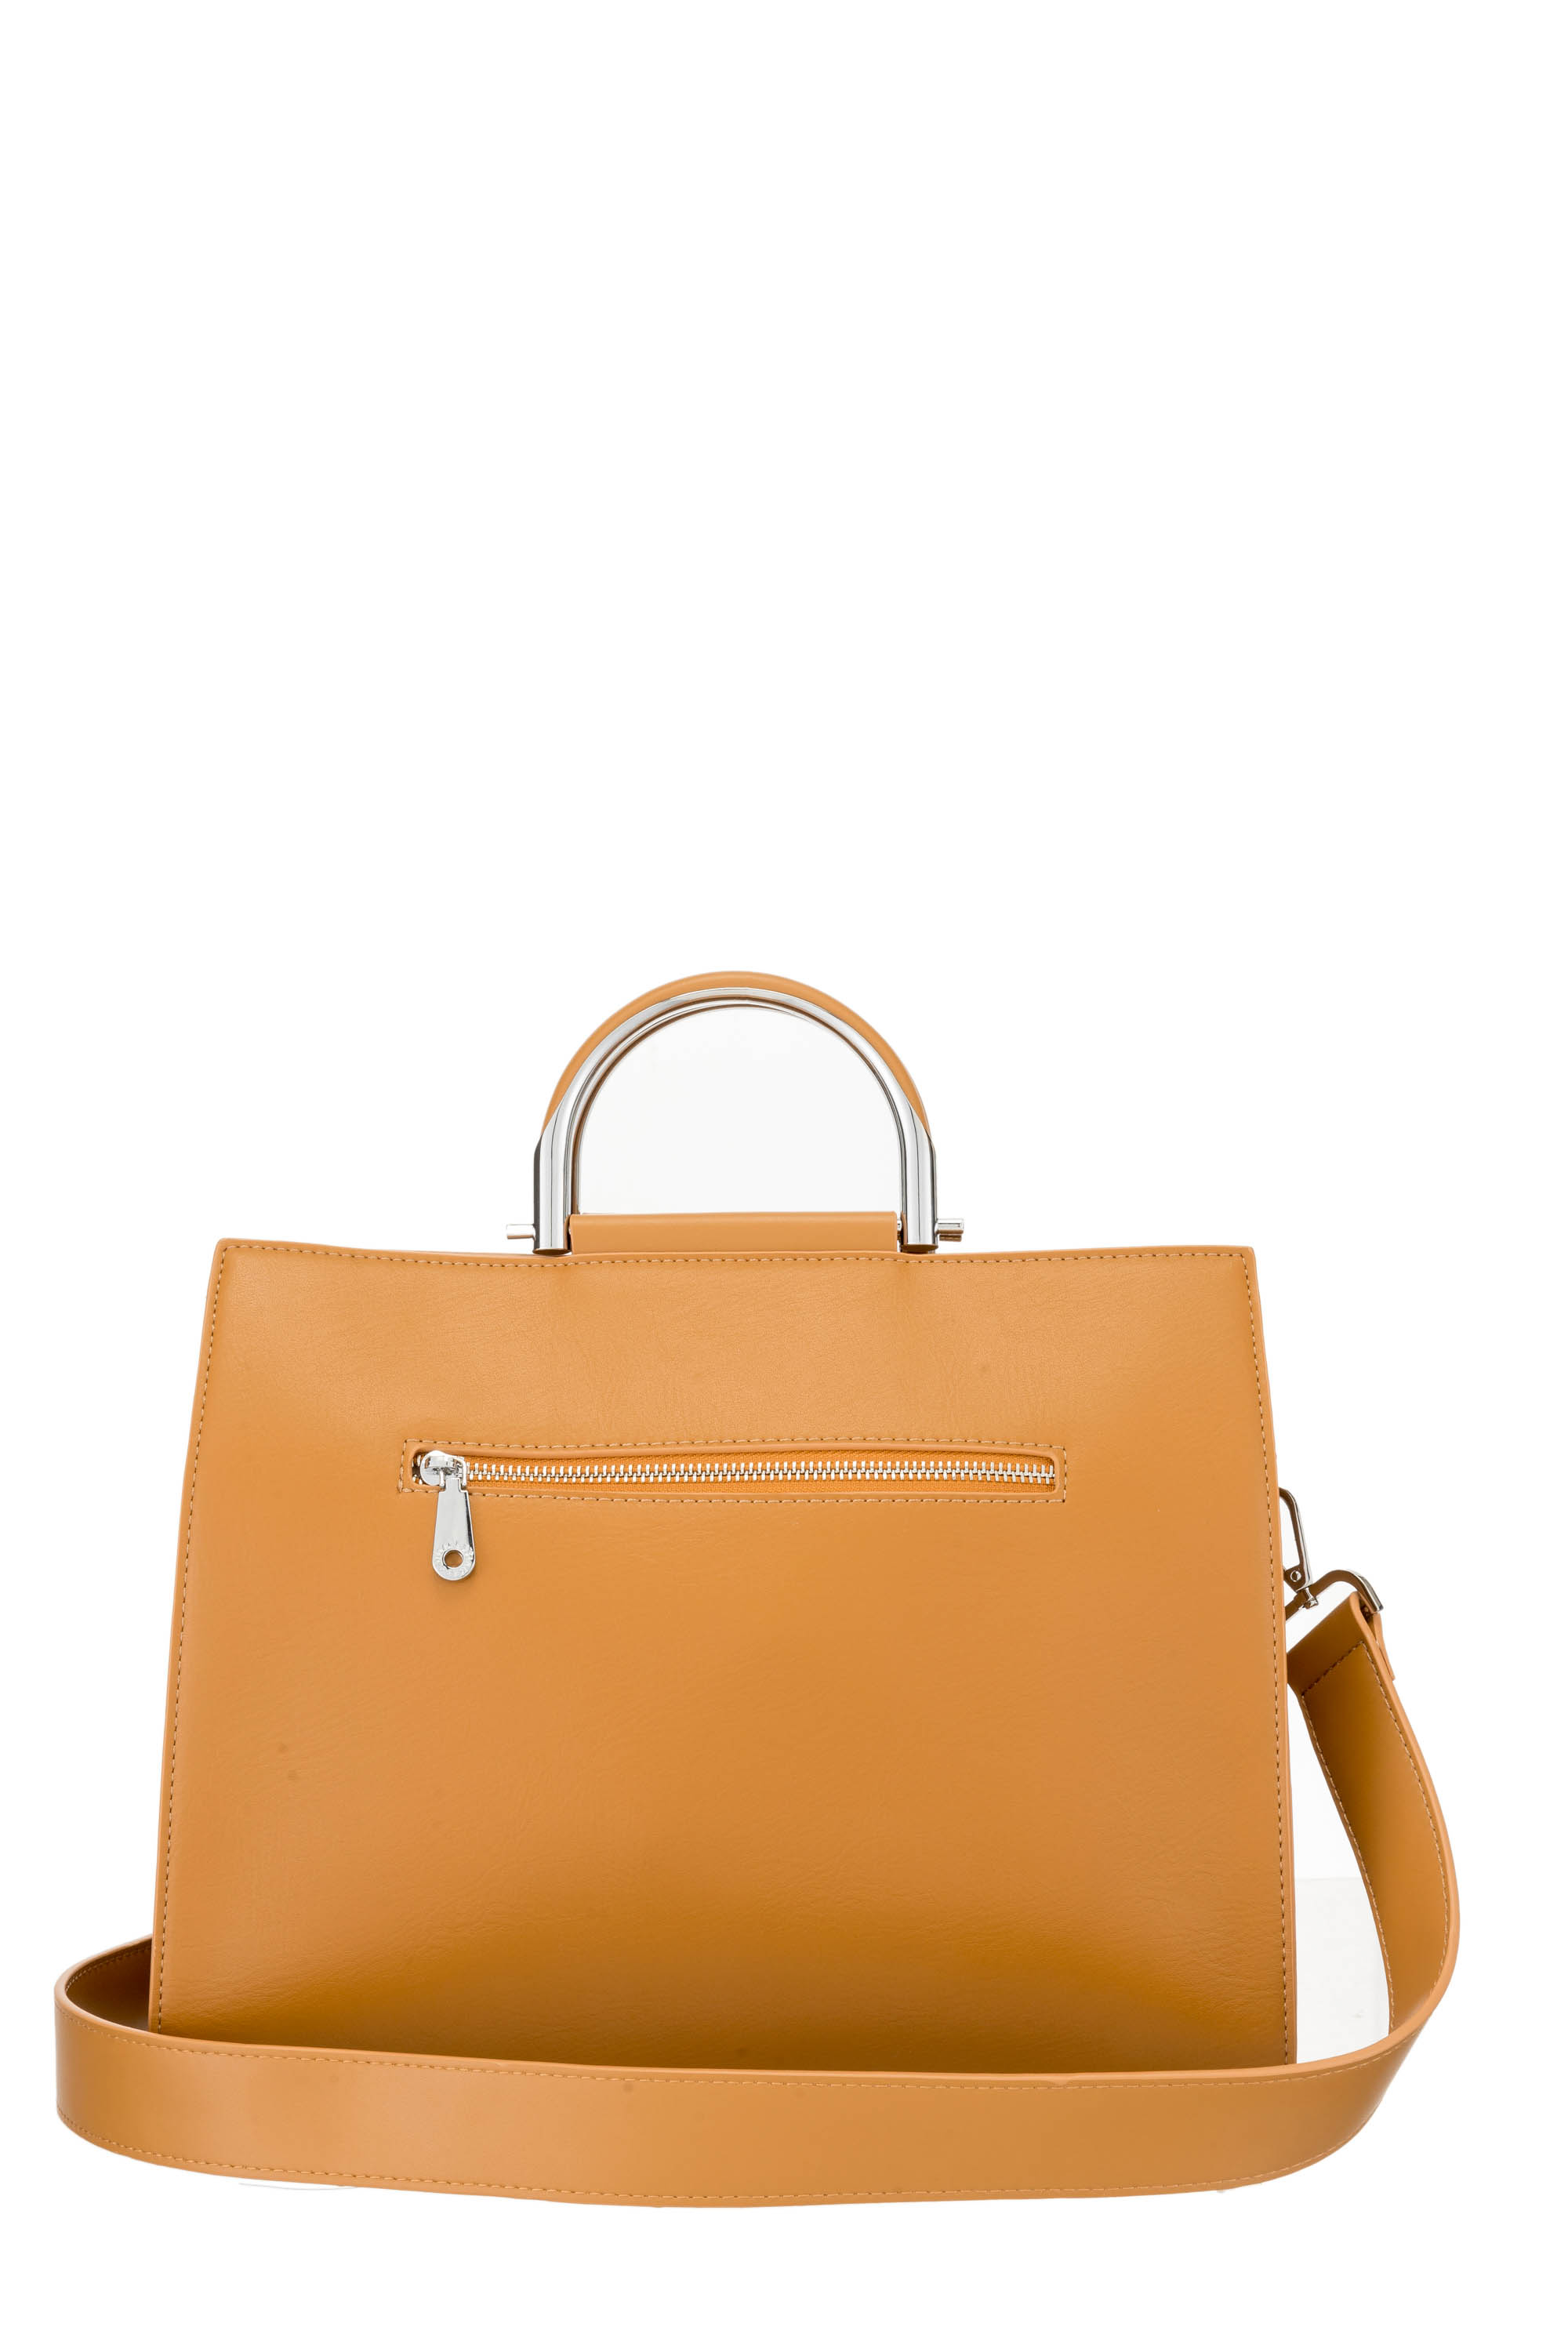 HAND BAG CAMEL - STYLE1644